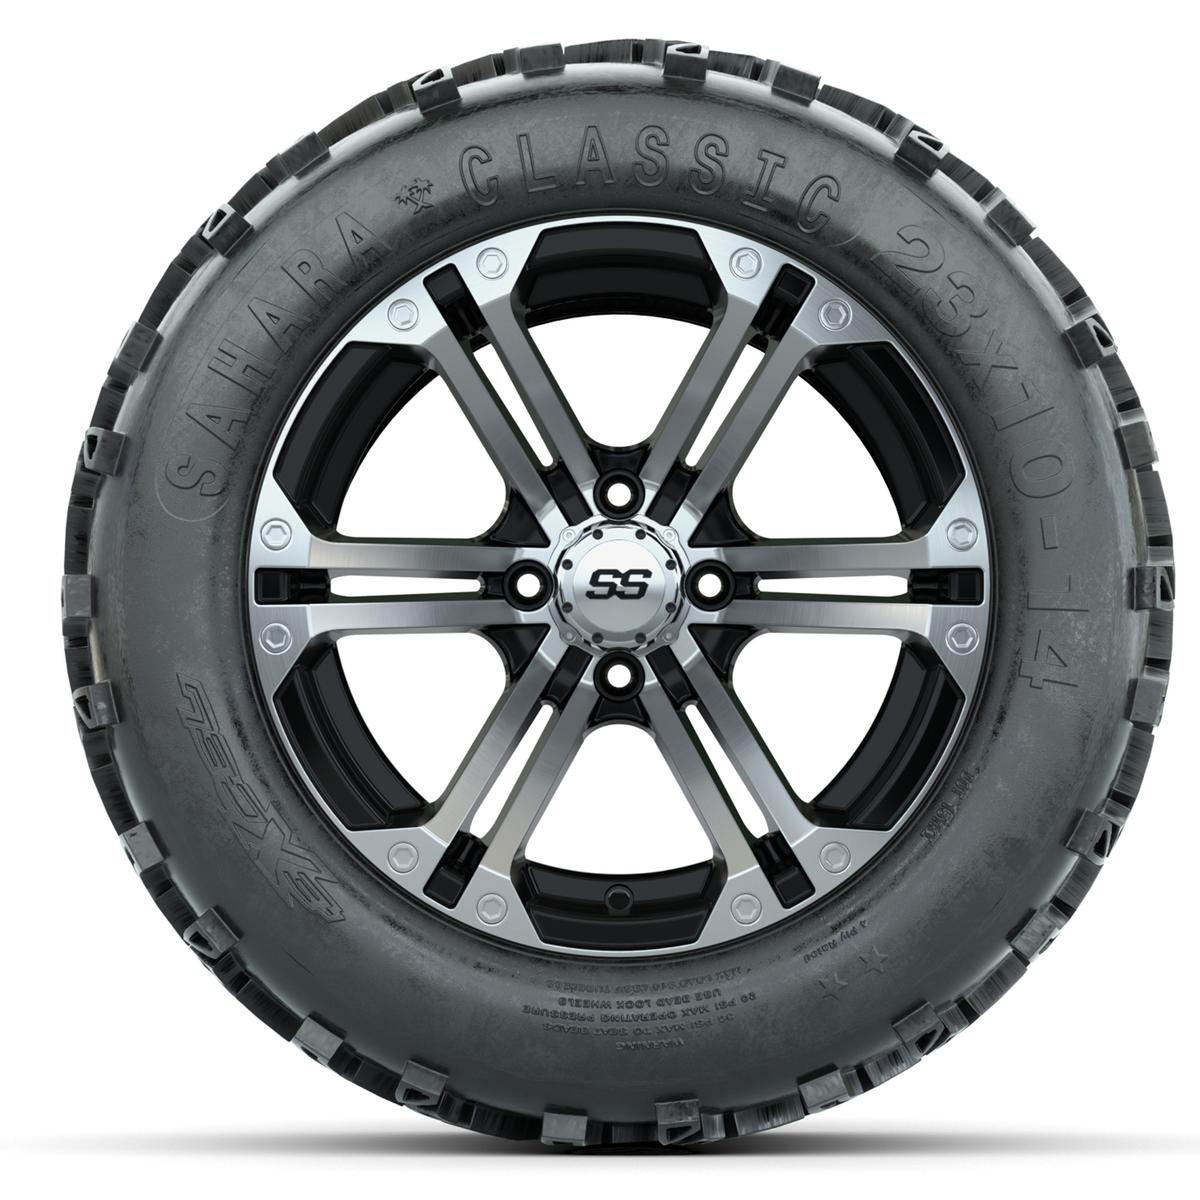 Set of (4) 14 in GTW Specter Wheels with 23x10-14 Sahara Classic All-Terrain Tires